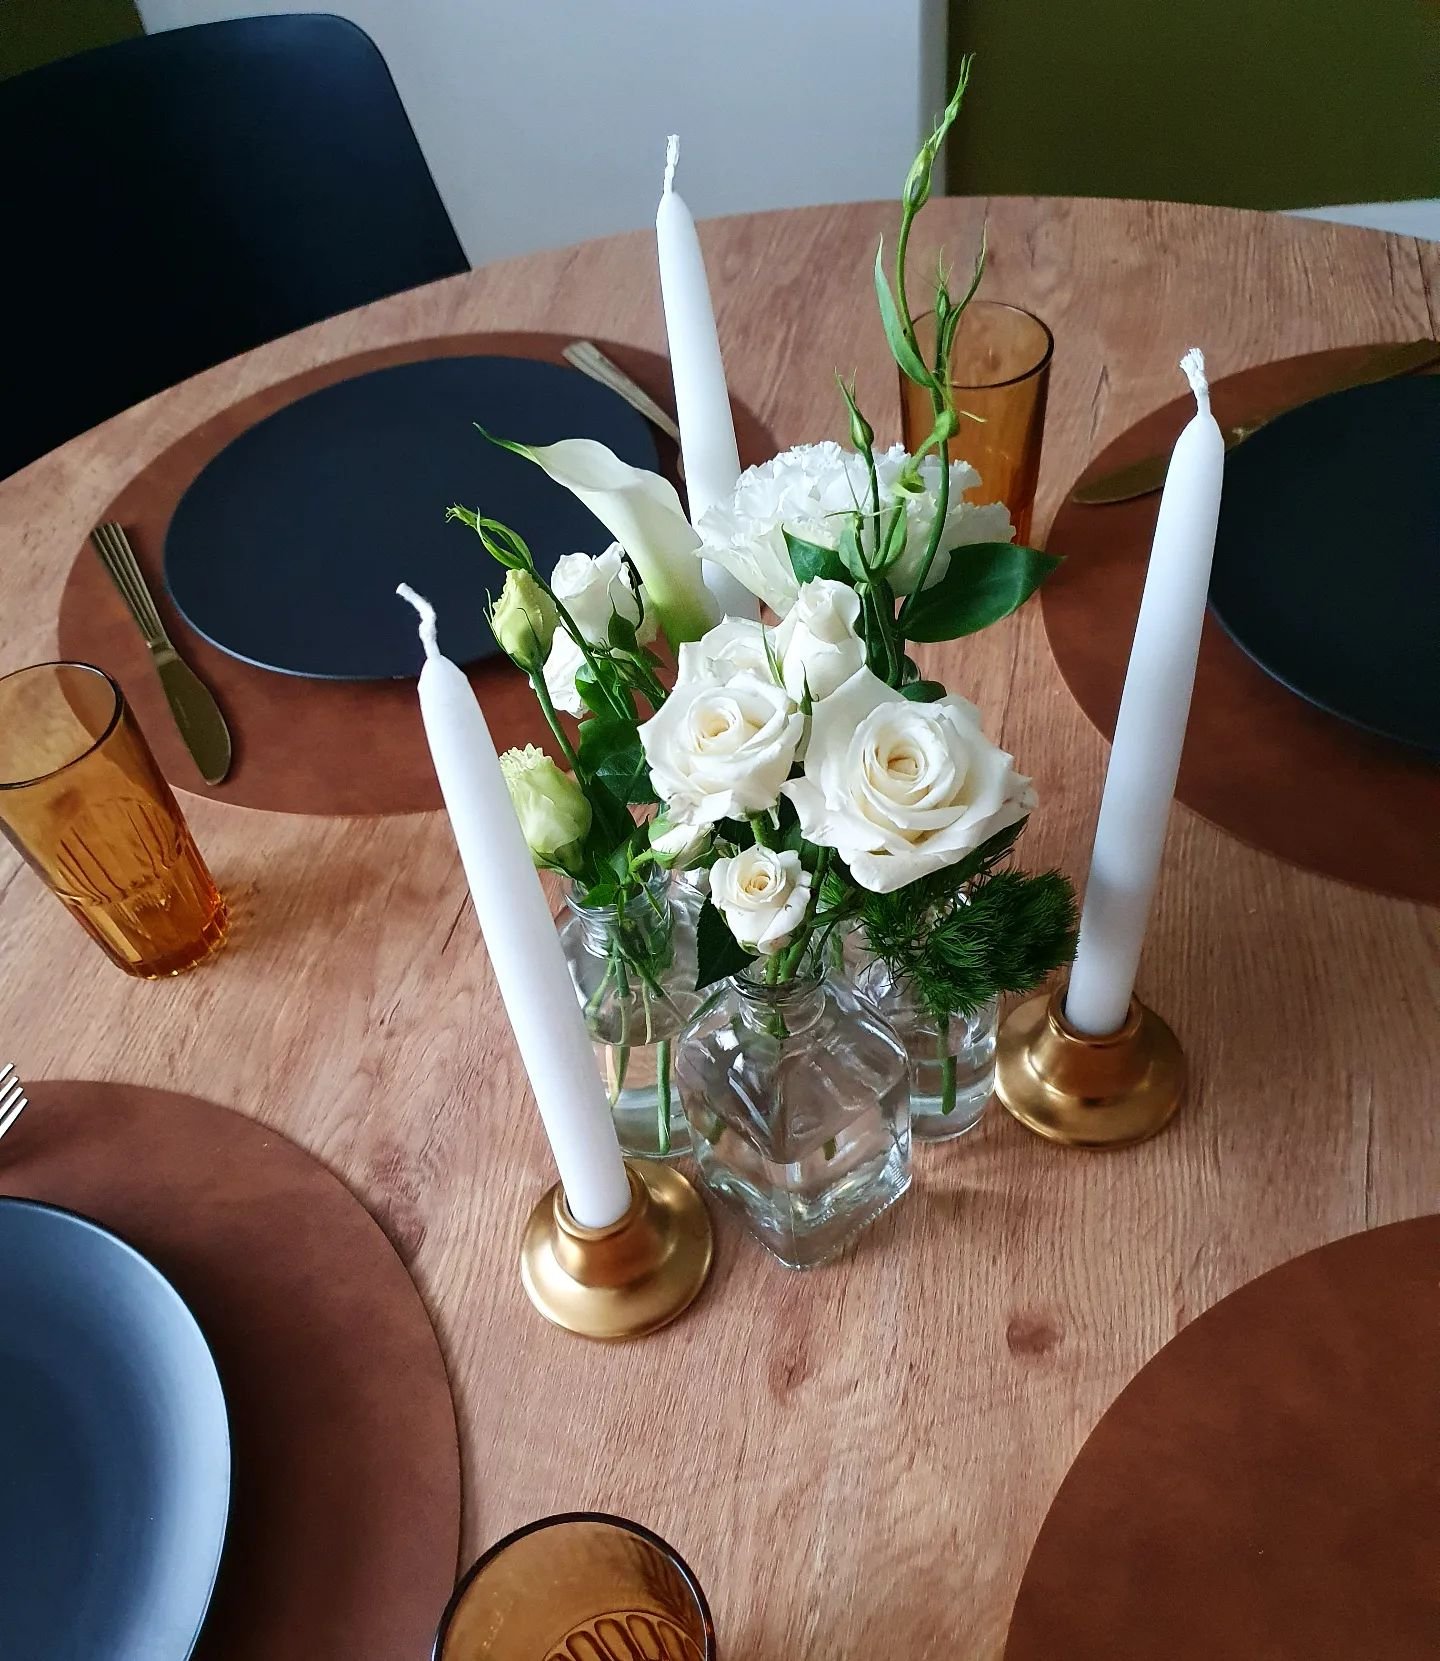 Bud vases + candles make a fantastic lower cost solution for a round table wedding centrepiece. 

They look great in clusters of 5 or more, depending on the table size. 

Perfect for minimalists, or couples who'd rather splash their floral budget on 